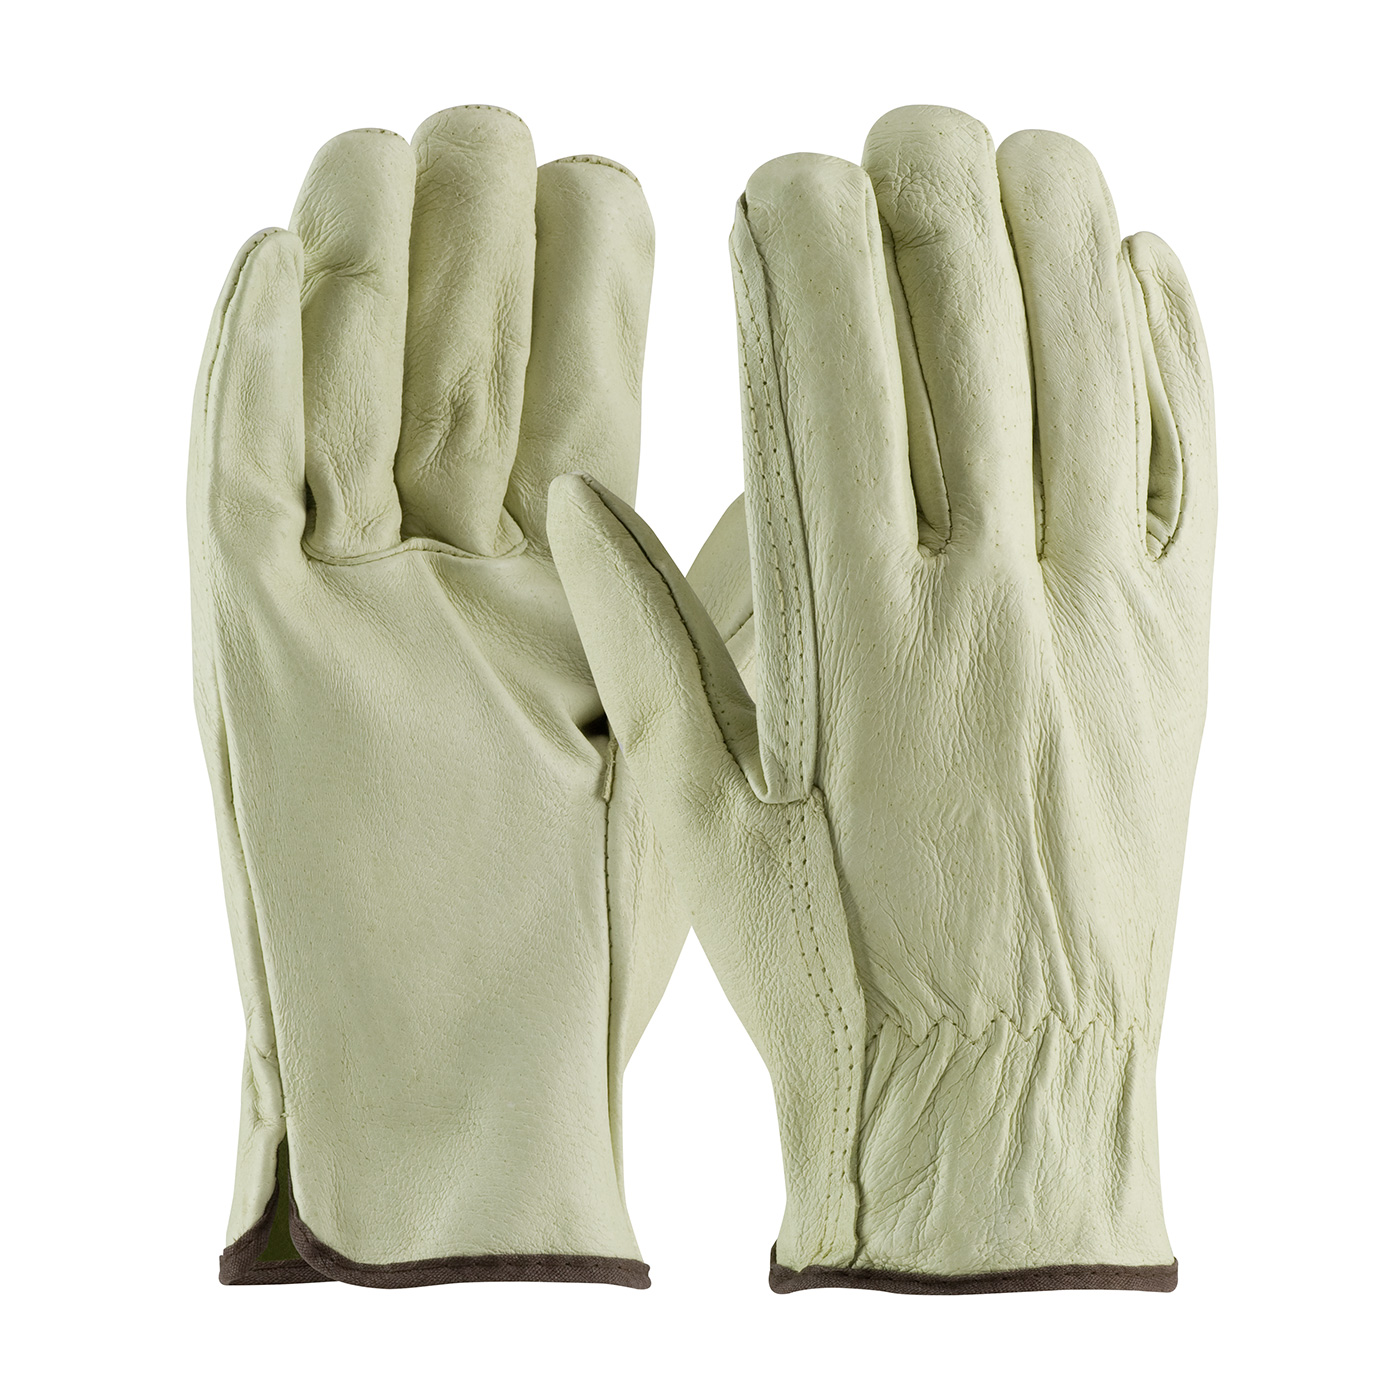 PIP 70-300/L Industry Grade Top Grain Pigskin Leather Drivers Glove - Straight Thumb - Large PID-70-300 L